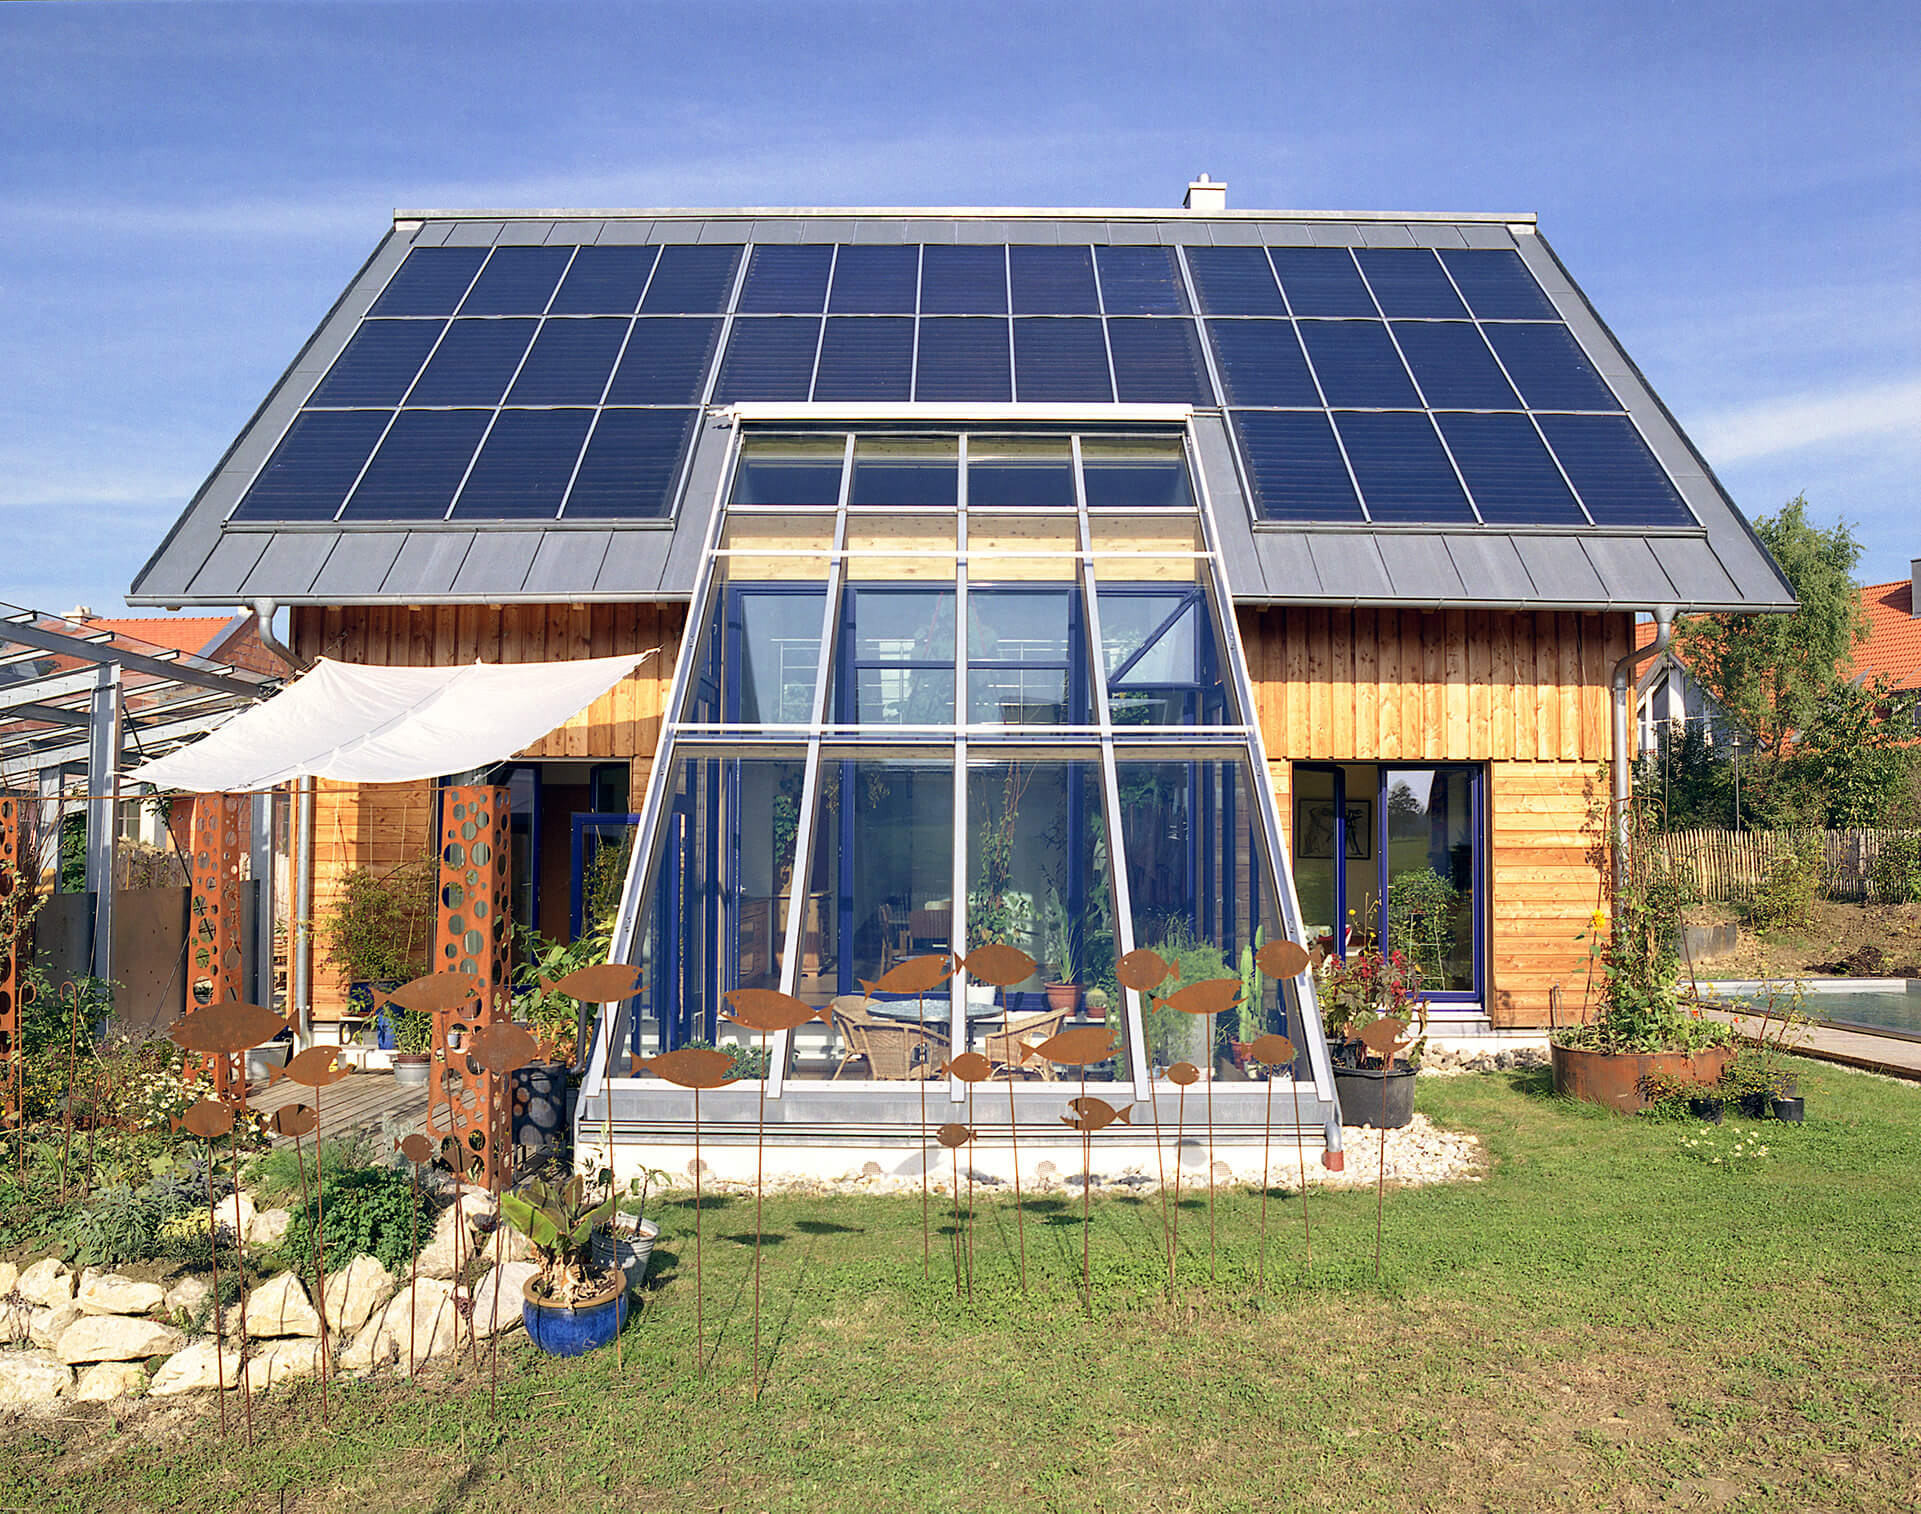 Solar thermal systems, like the one shown in the SolarAktivHaus here, can be efficiently and economically controlled using artificial neural networks.